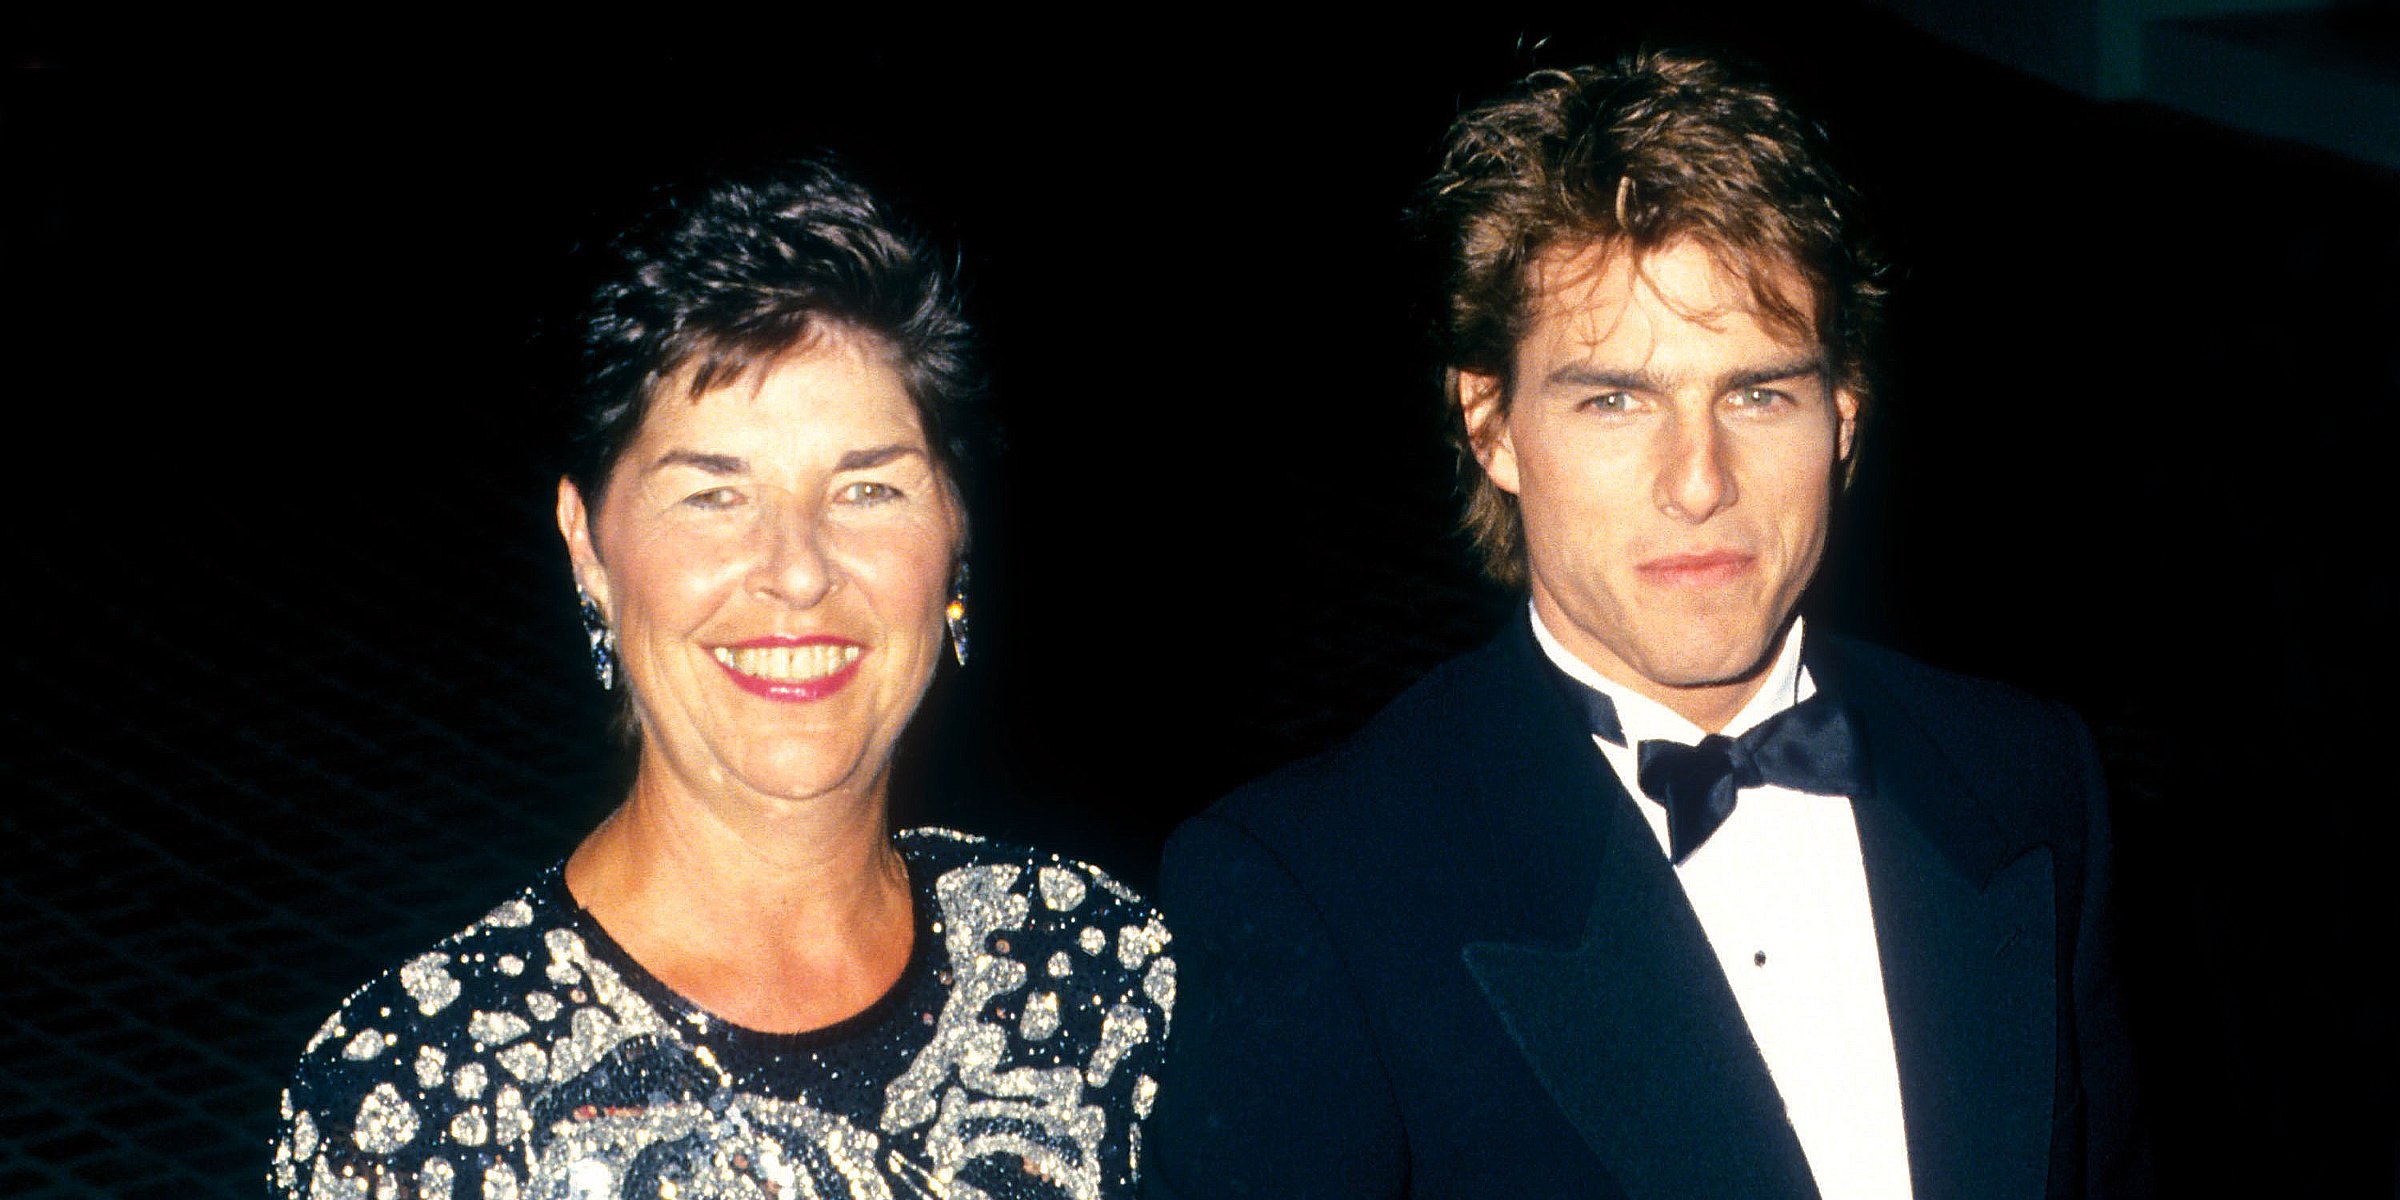 Mary Lee Pfeiffer and Tom Cruise | Source: Getty Images